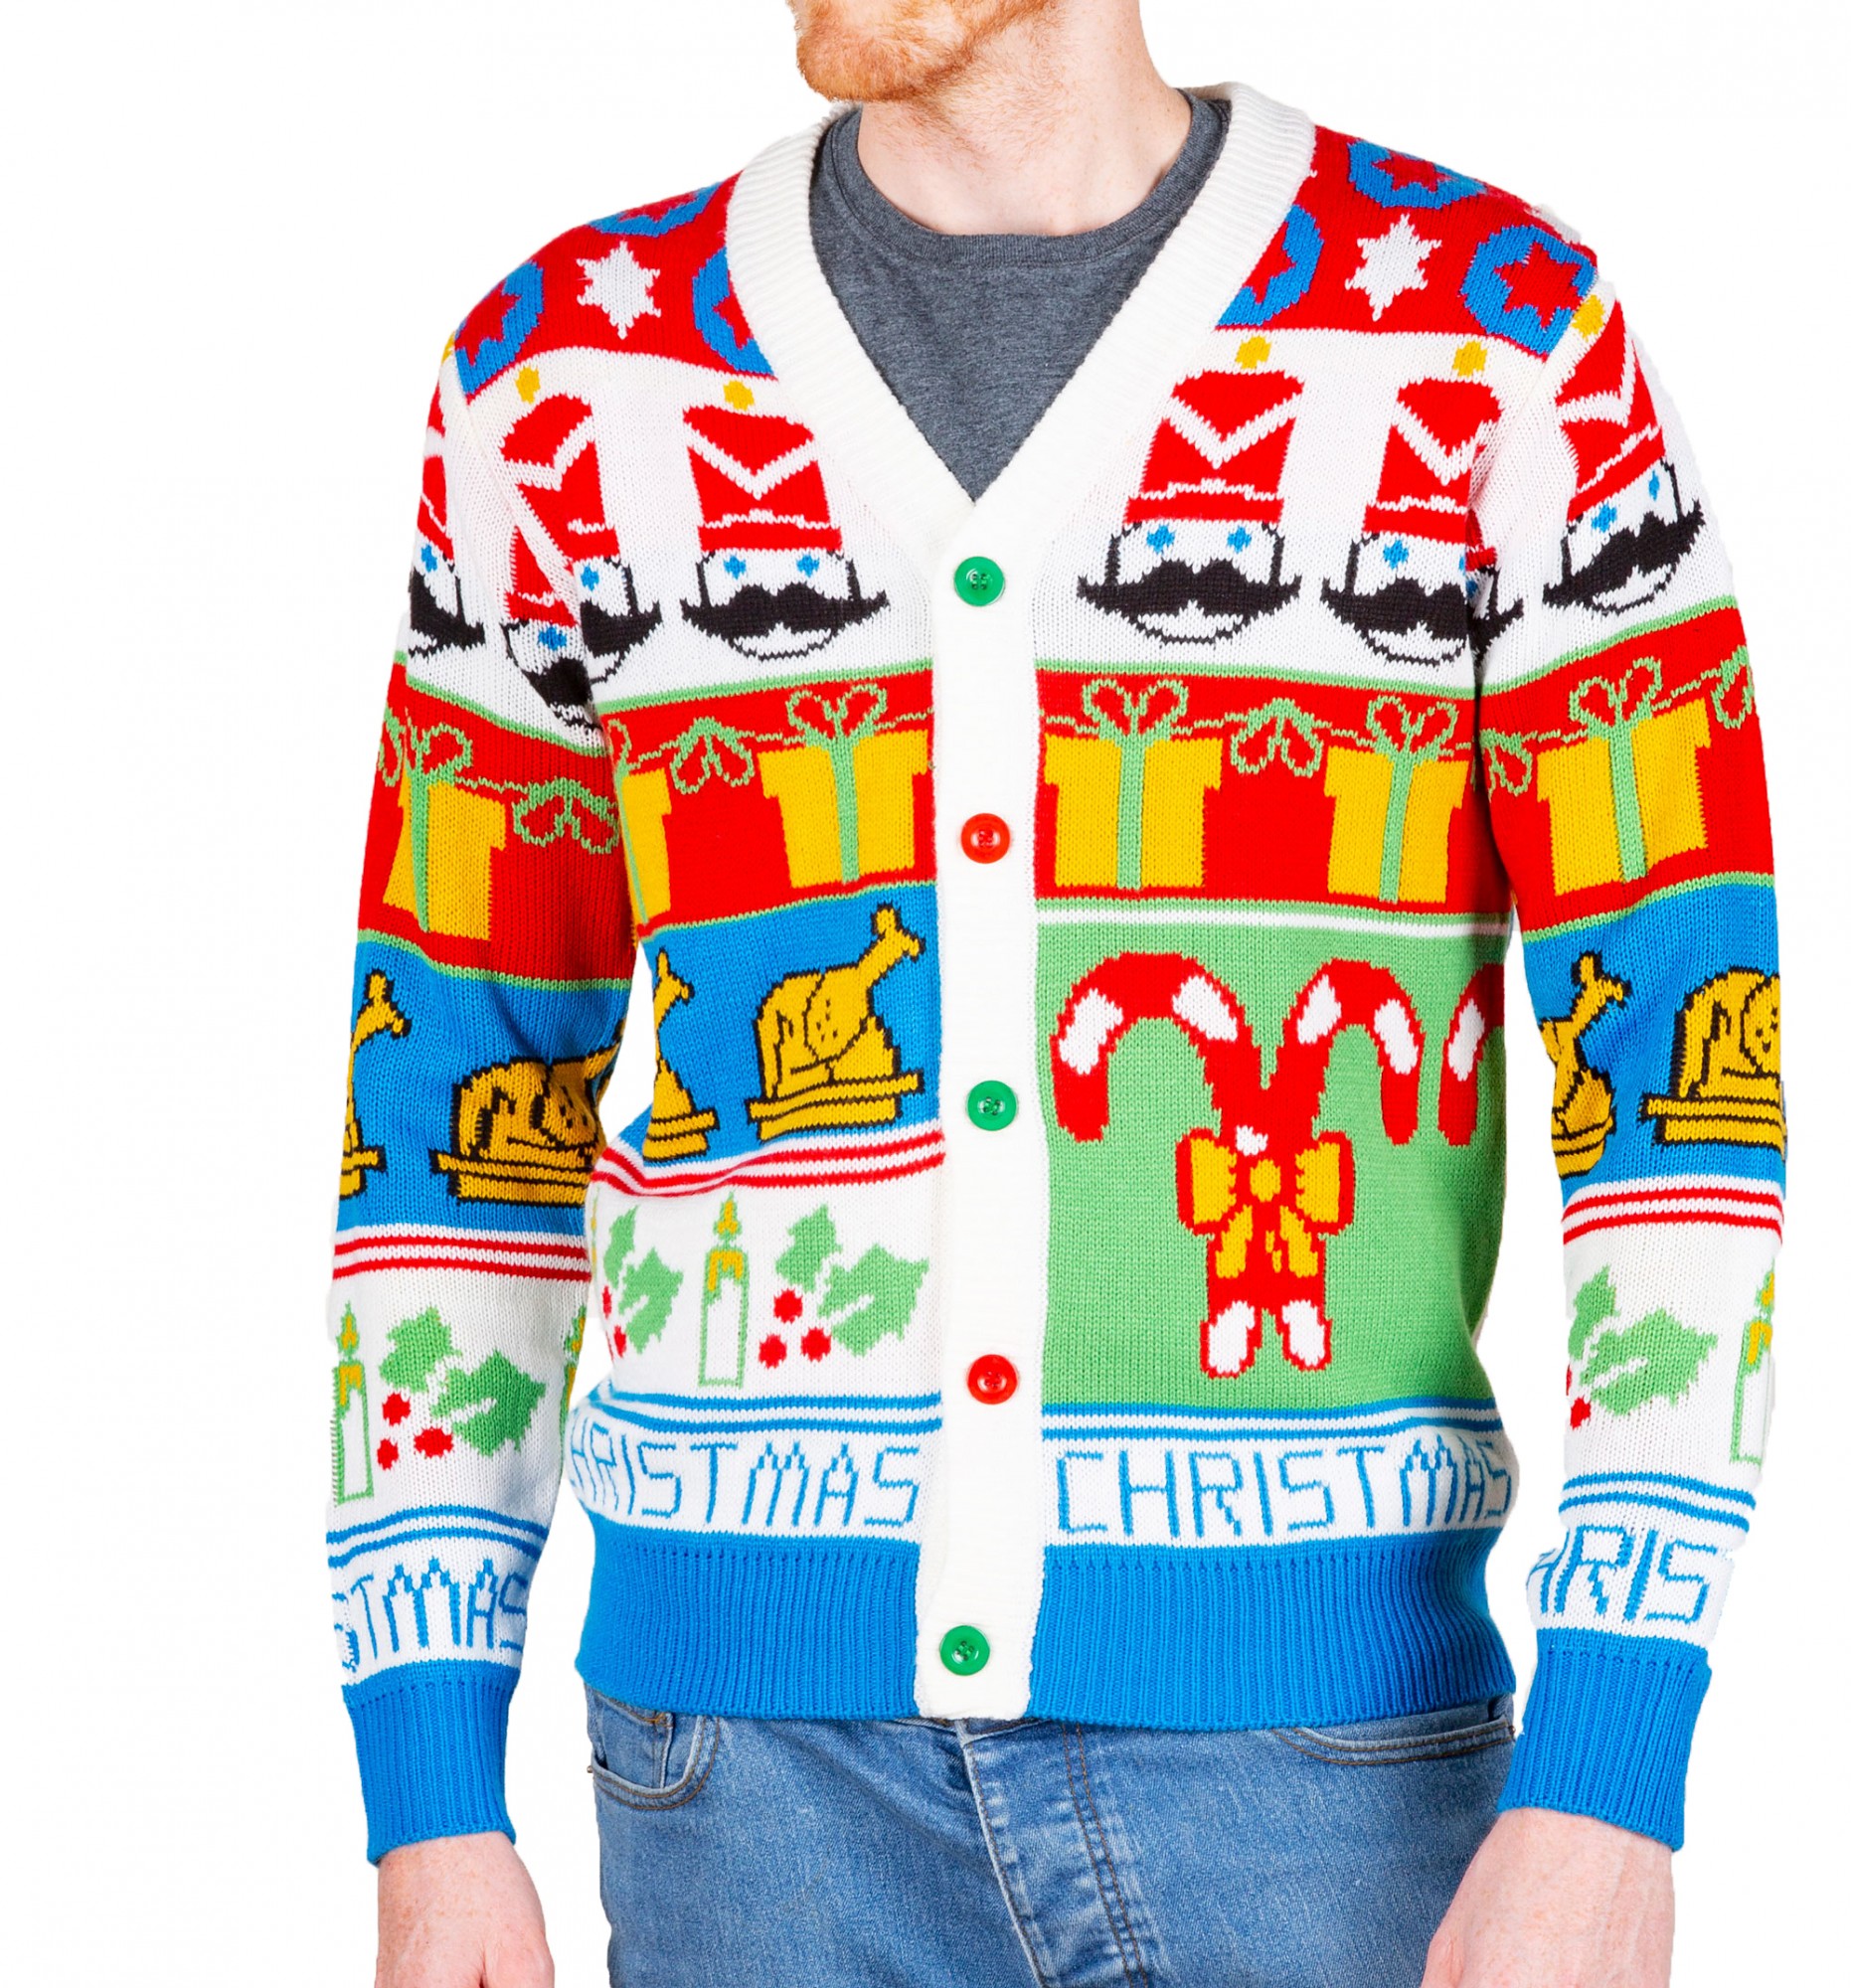 The Nutcracker Knitted Christmas Cardigan from Cheesy Christmas Jumpers